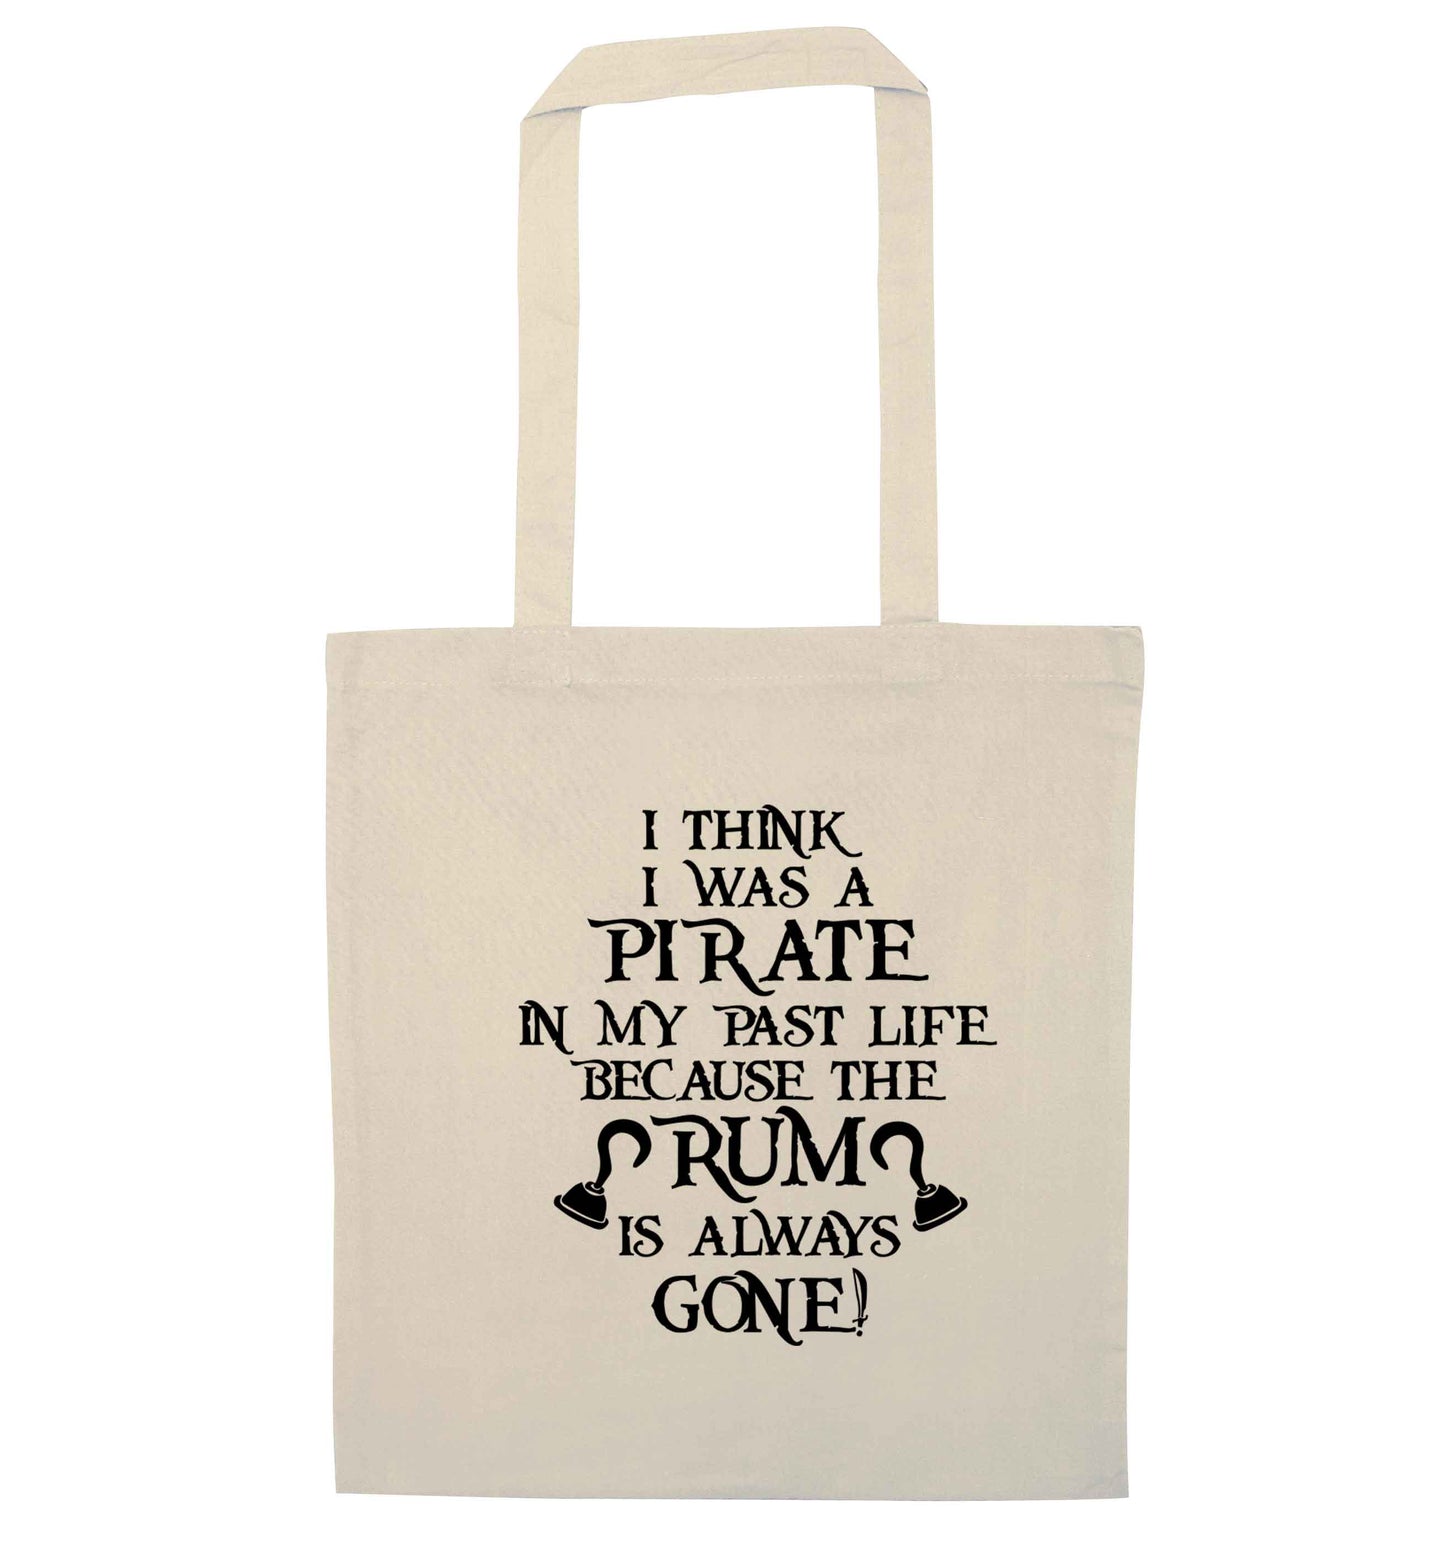 I think I was a pirate in my past life the rum is always gone natural tote bag